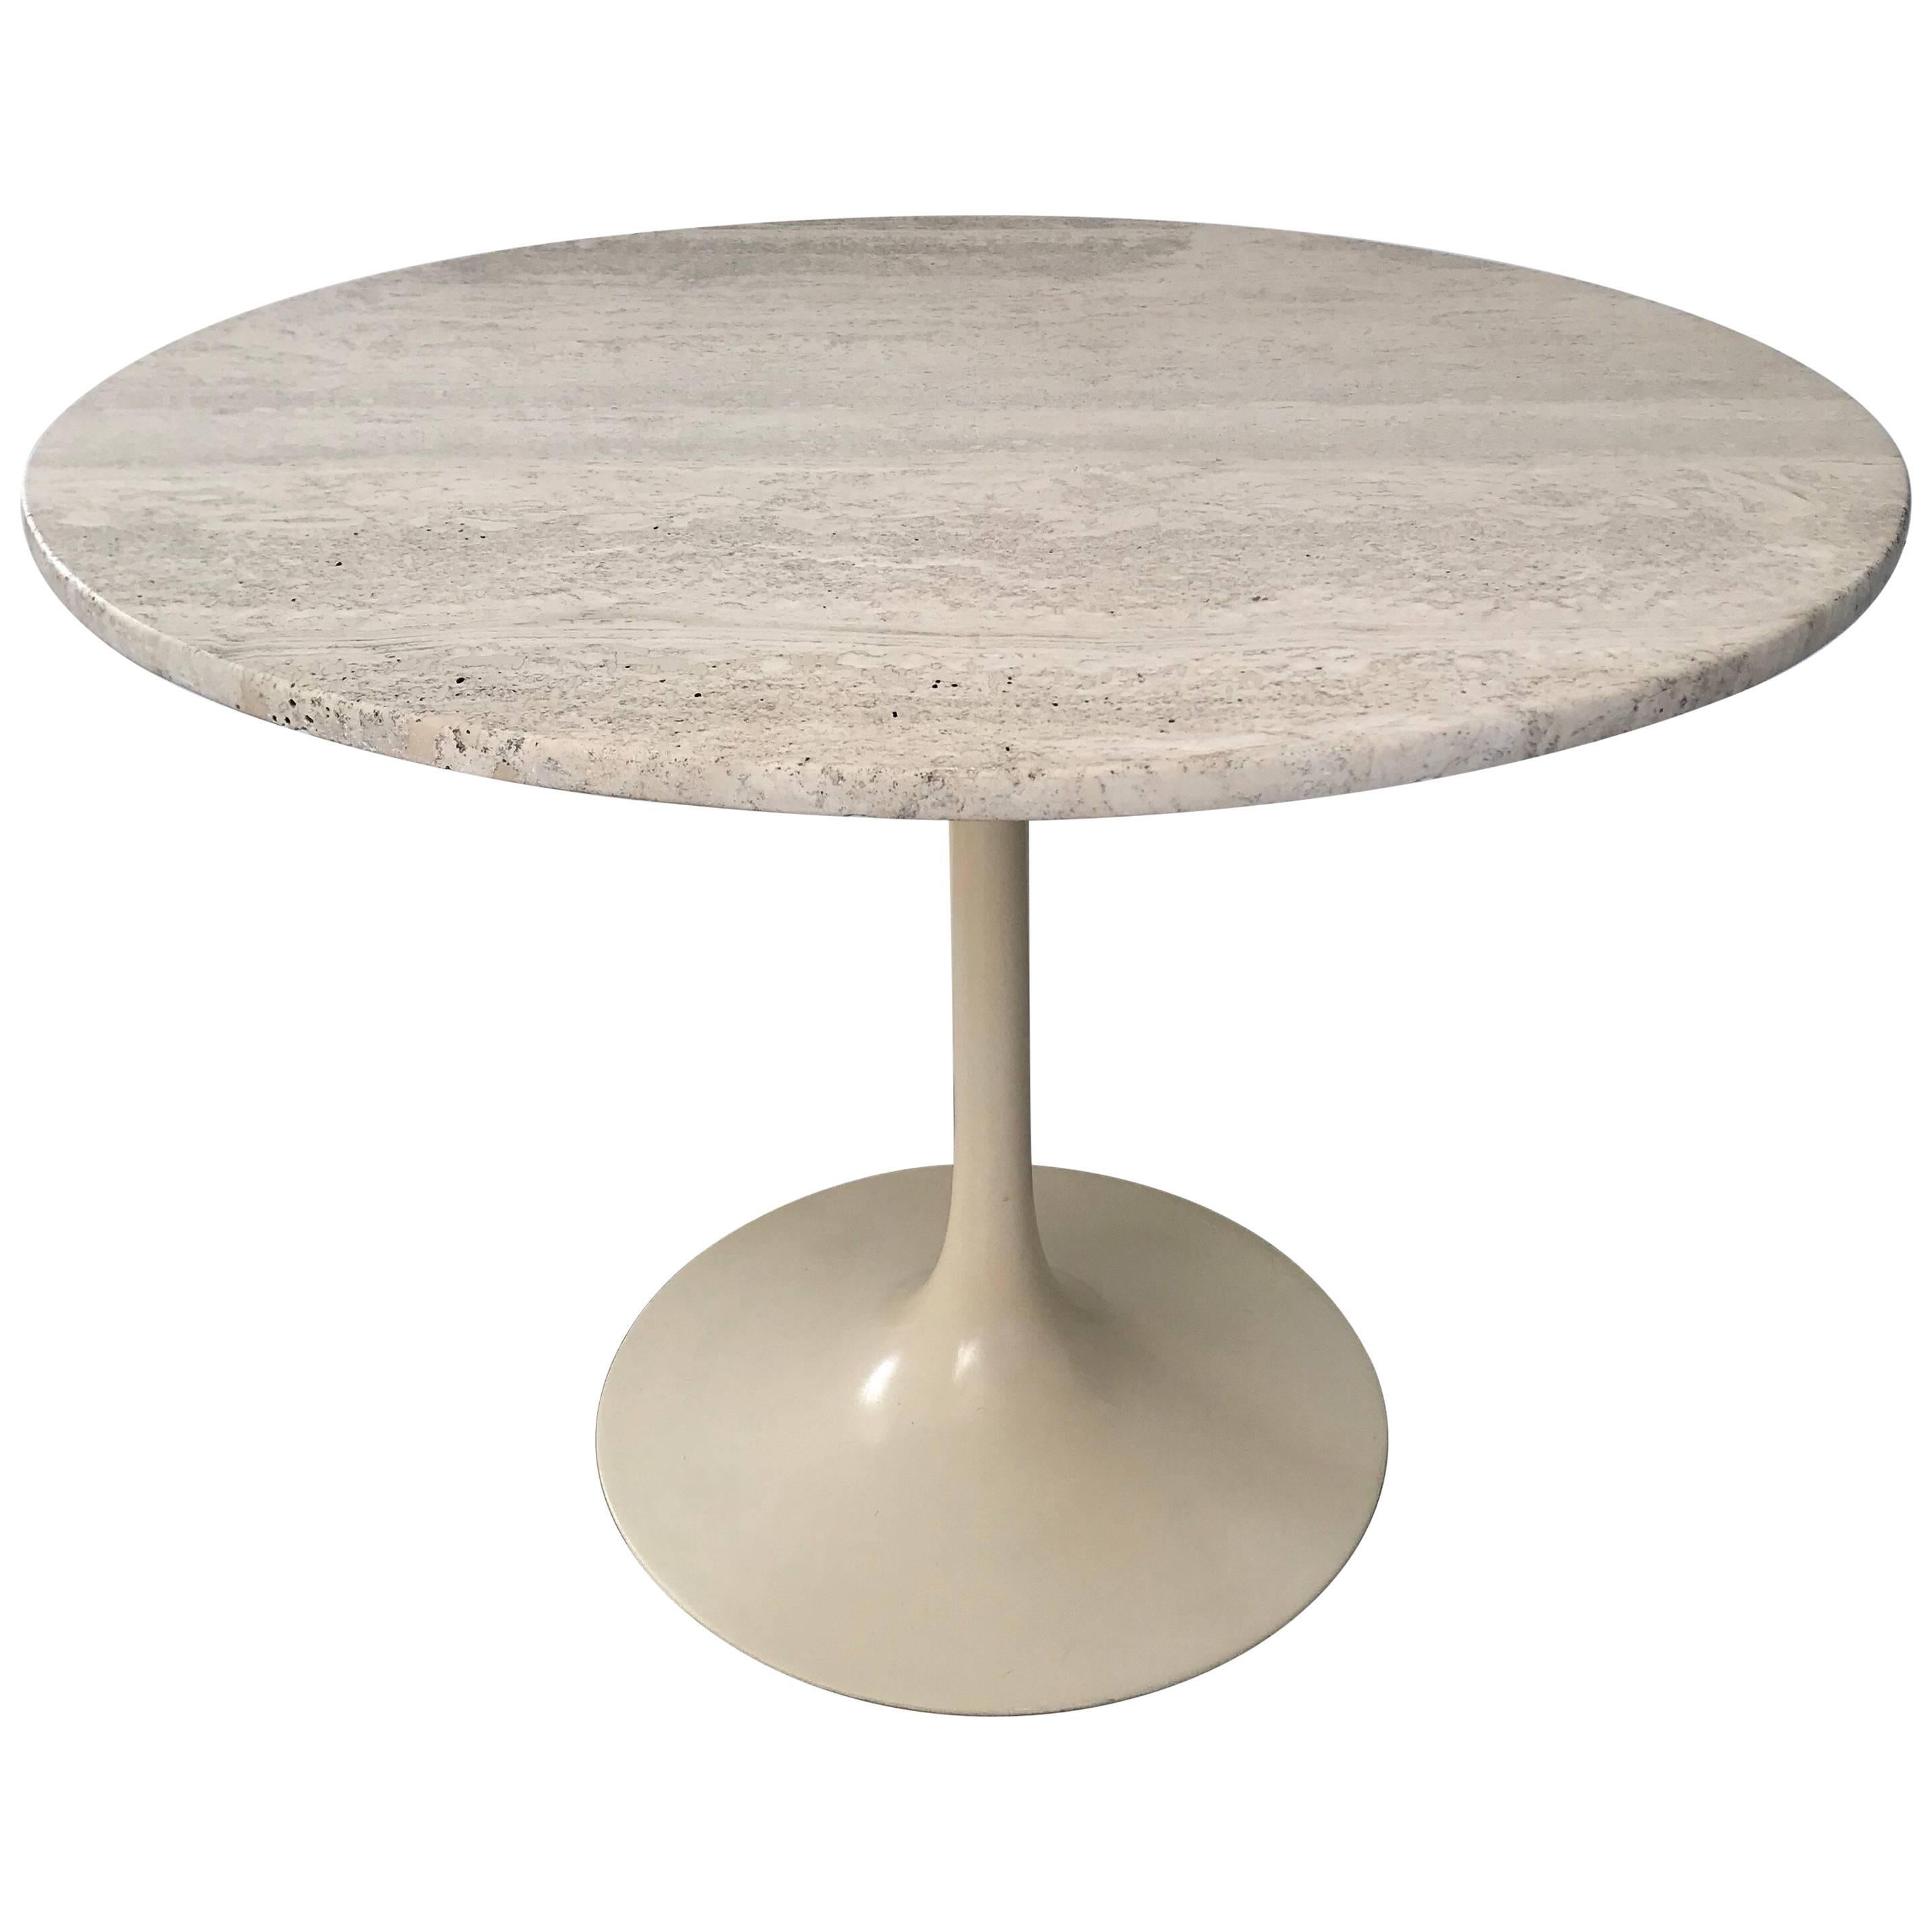 Maurice Burke Travertine and Cream Tulip Base Dining or Centre Table